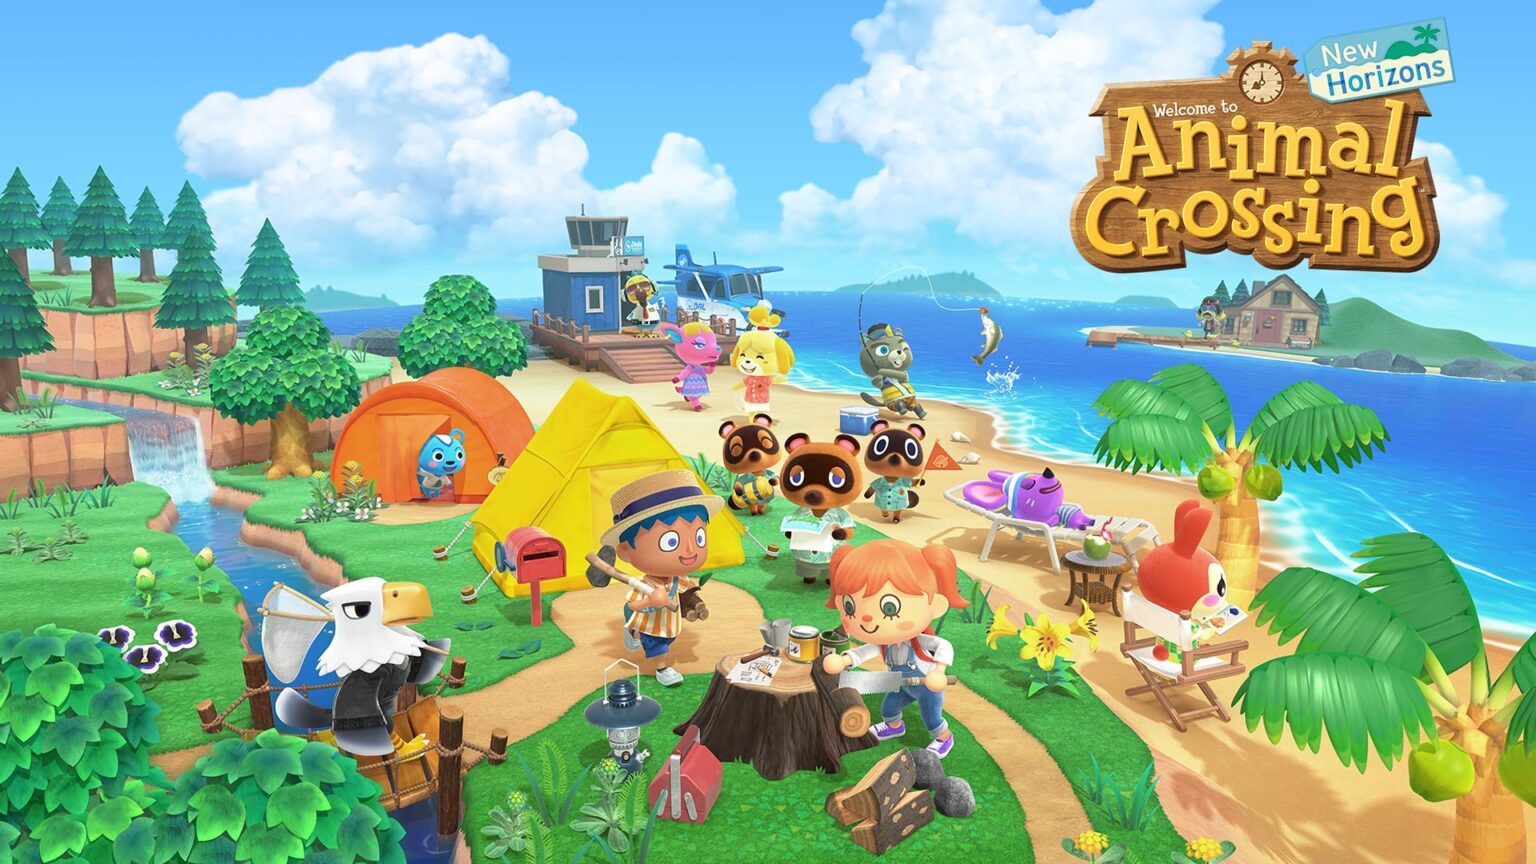 'Animal Crossing: New Horizons' has been Nintendo Switch’s highlight since quarantine began. Are these games officially old news?